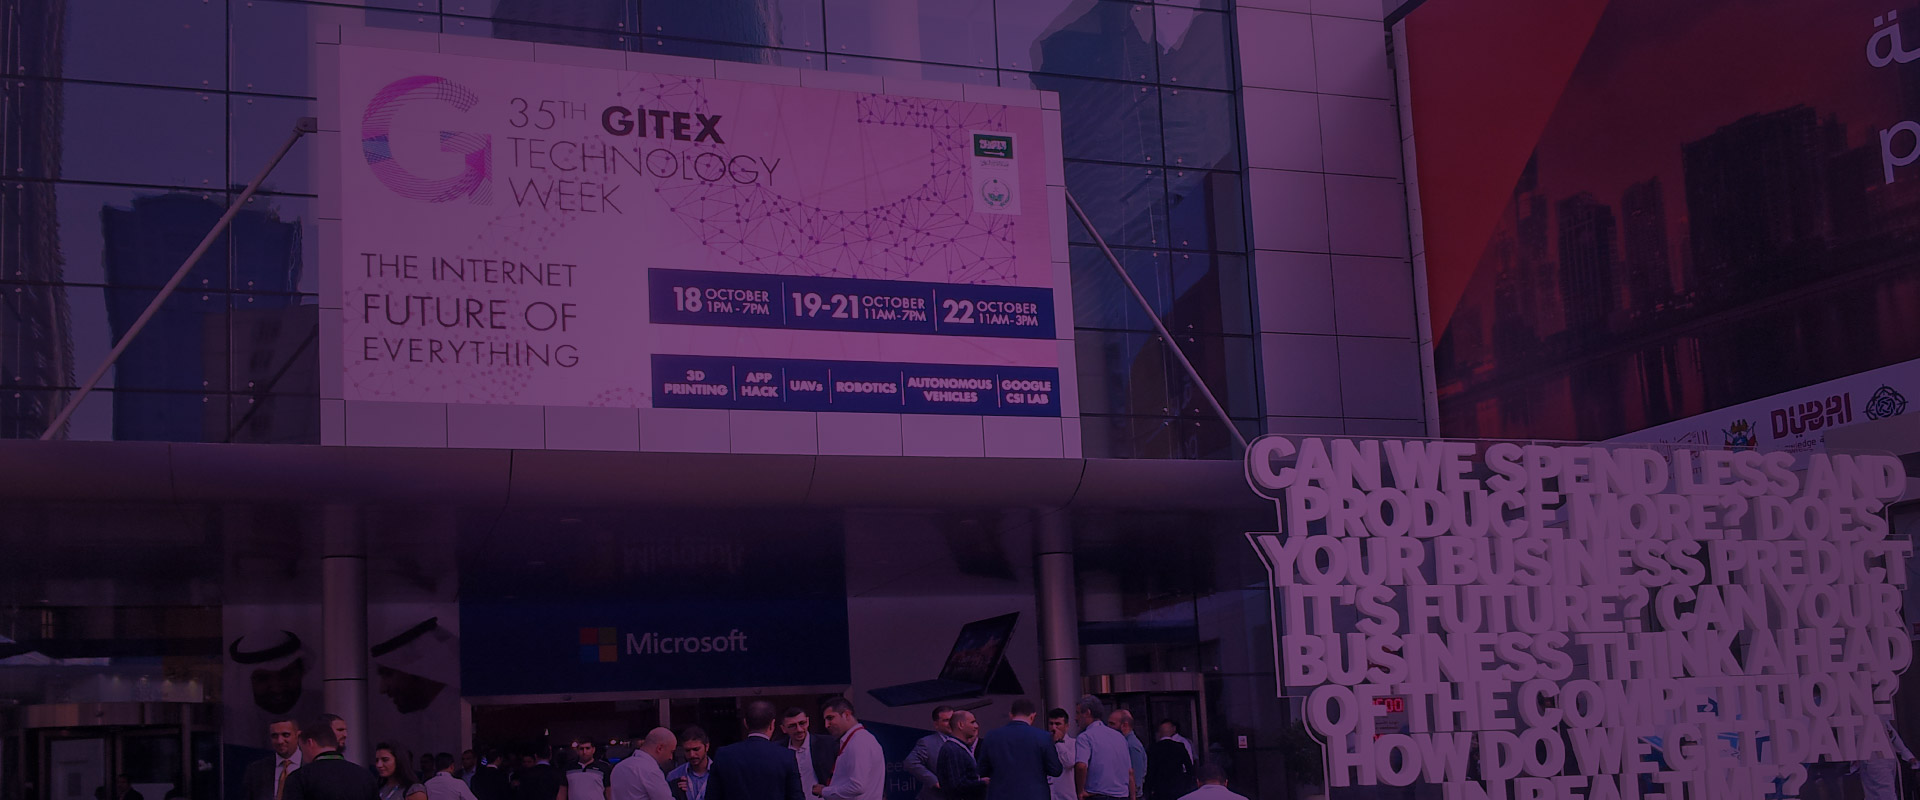 Meeting global visionaries from leading companies at GiTex 2015 (Dubai), to improve user experience of their product